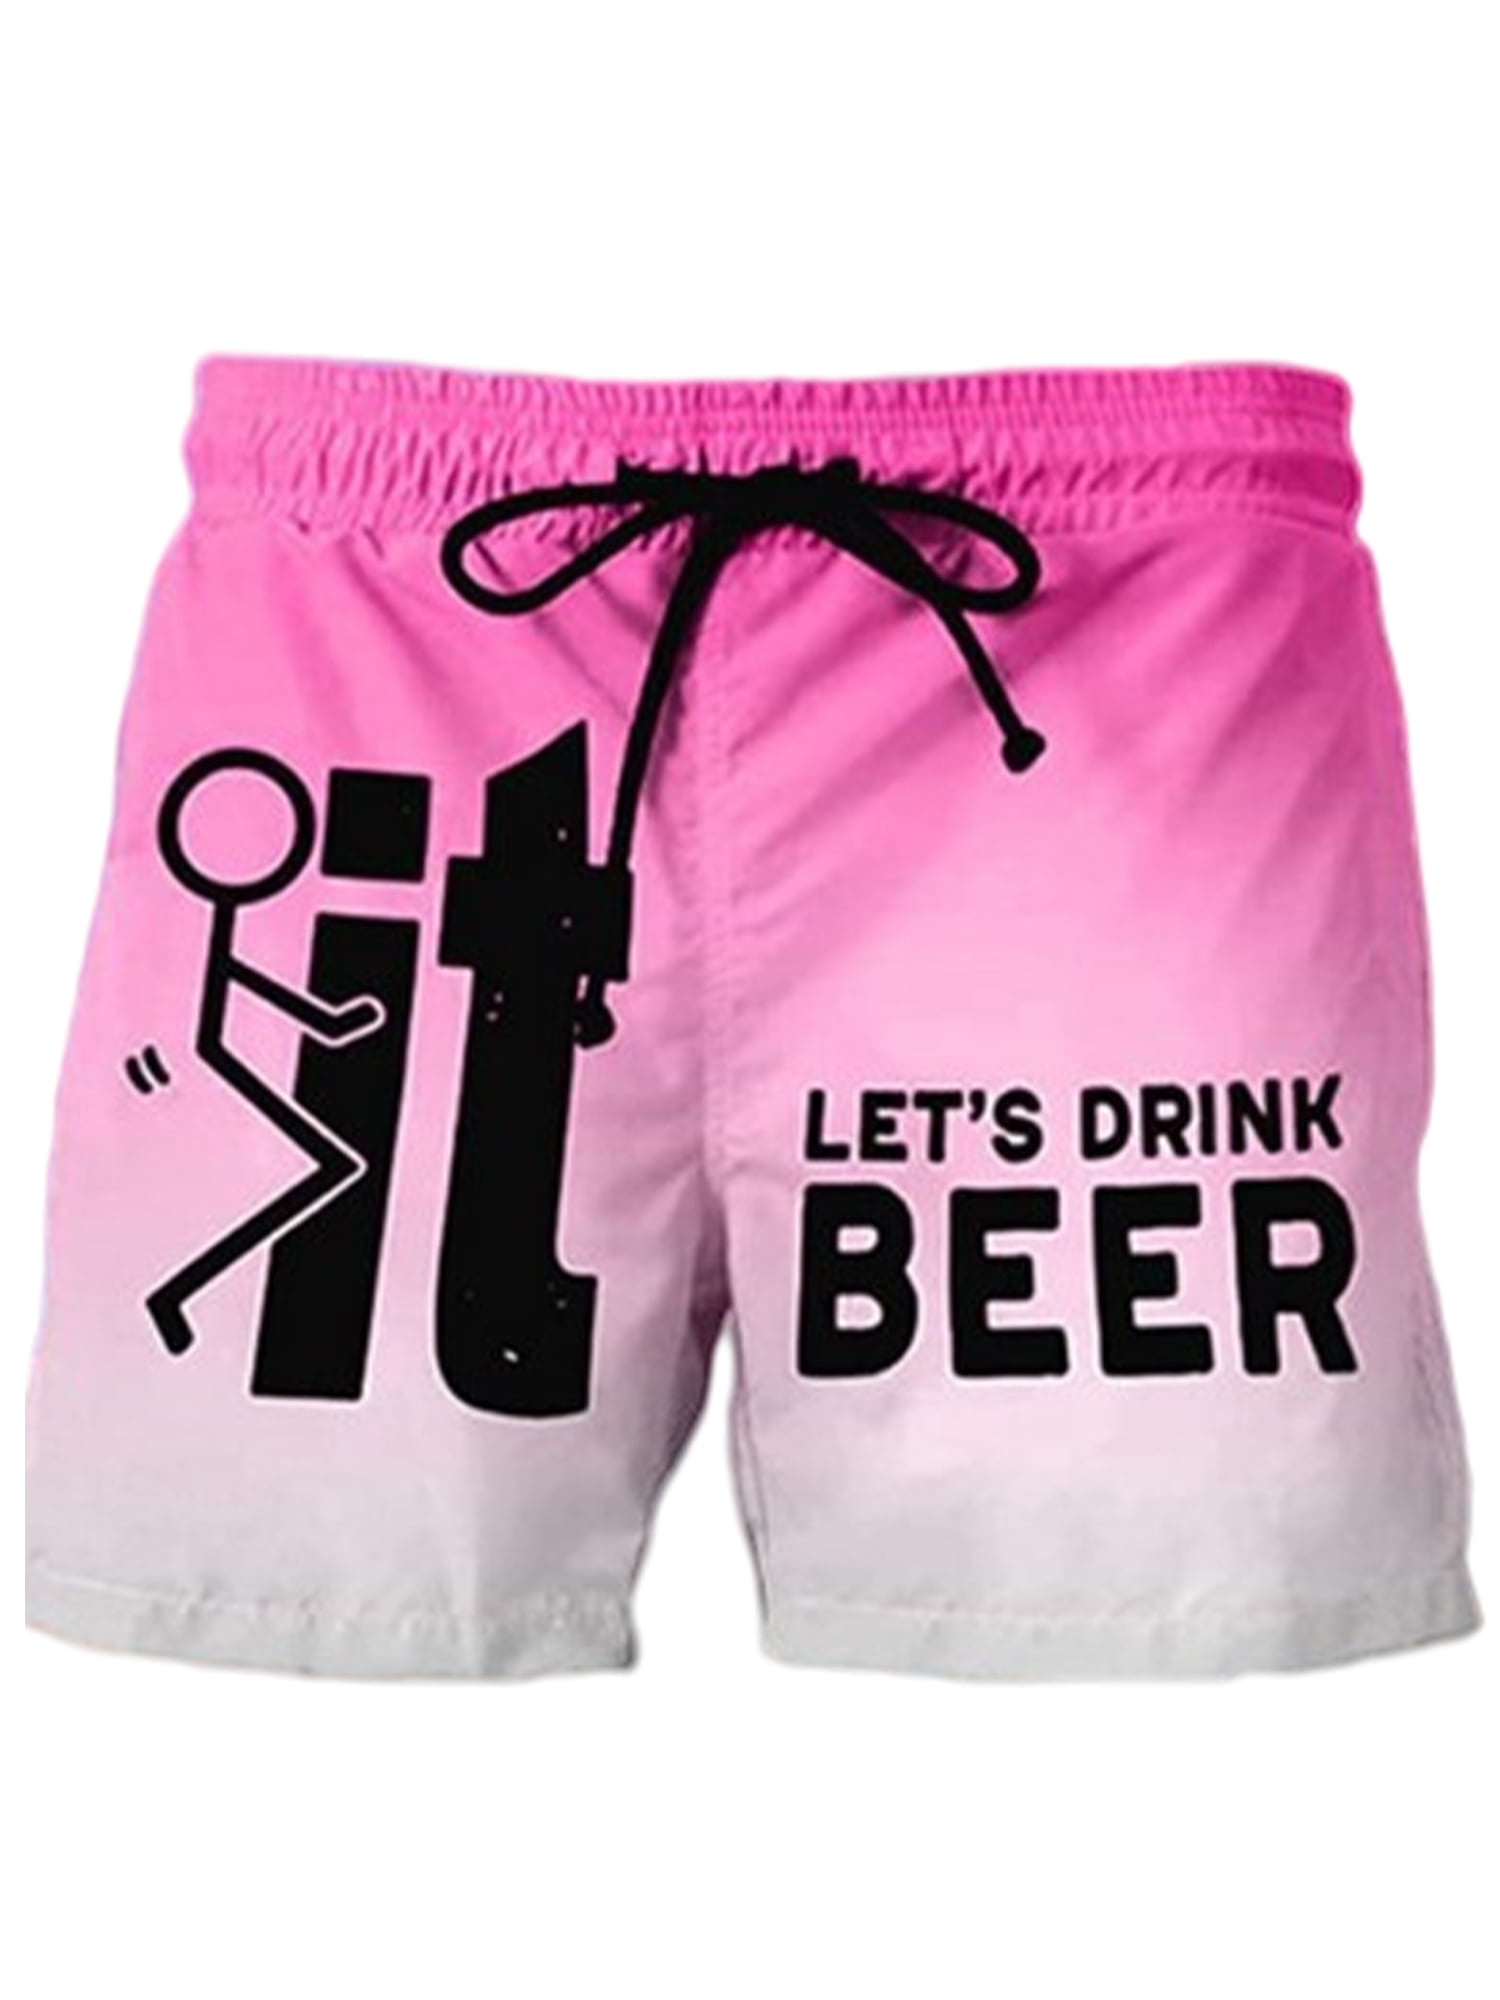 Hemlock Men Beach Shorts Printed Funny Swim Trunks Cock Print Beer Festival Shorts Trousers Plus Size Shorts with Pockets 